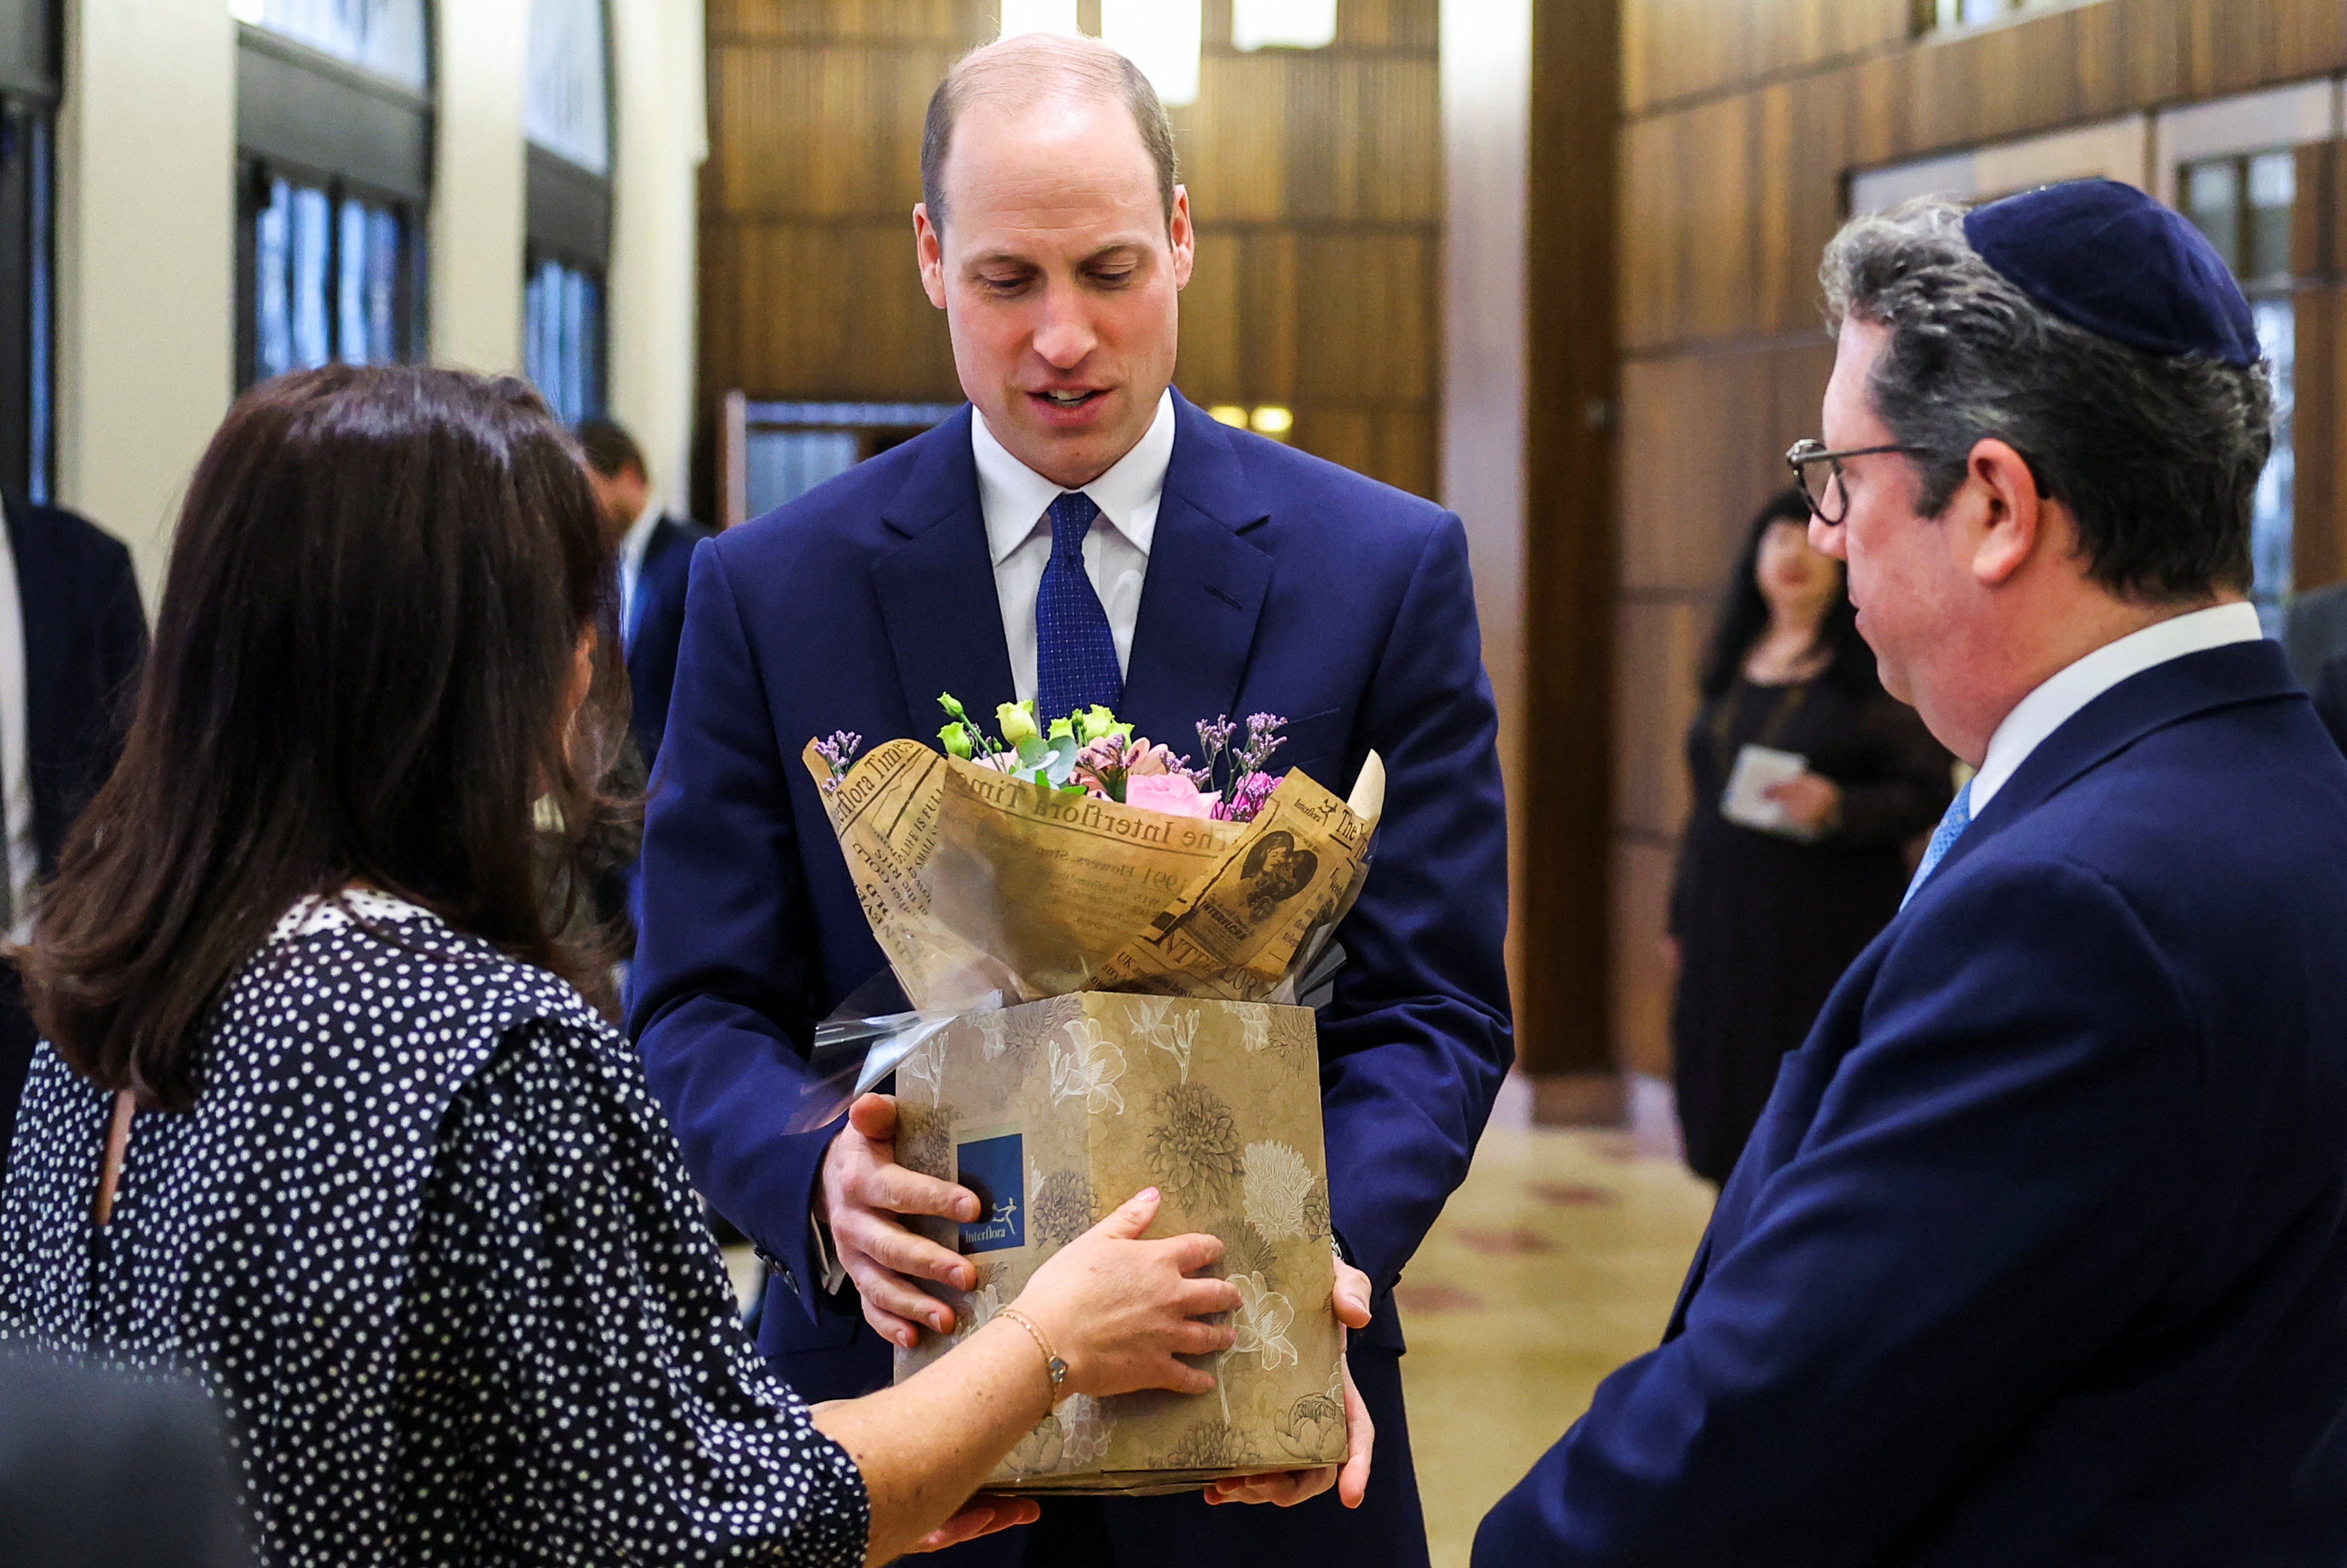 Prince William speaks receives a bouquet of flowers during a visit to the Western Marble Arch Synagogue on February 29, 2024 in London, England. | Source: Getty Images